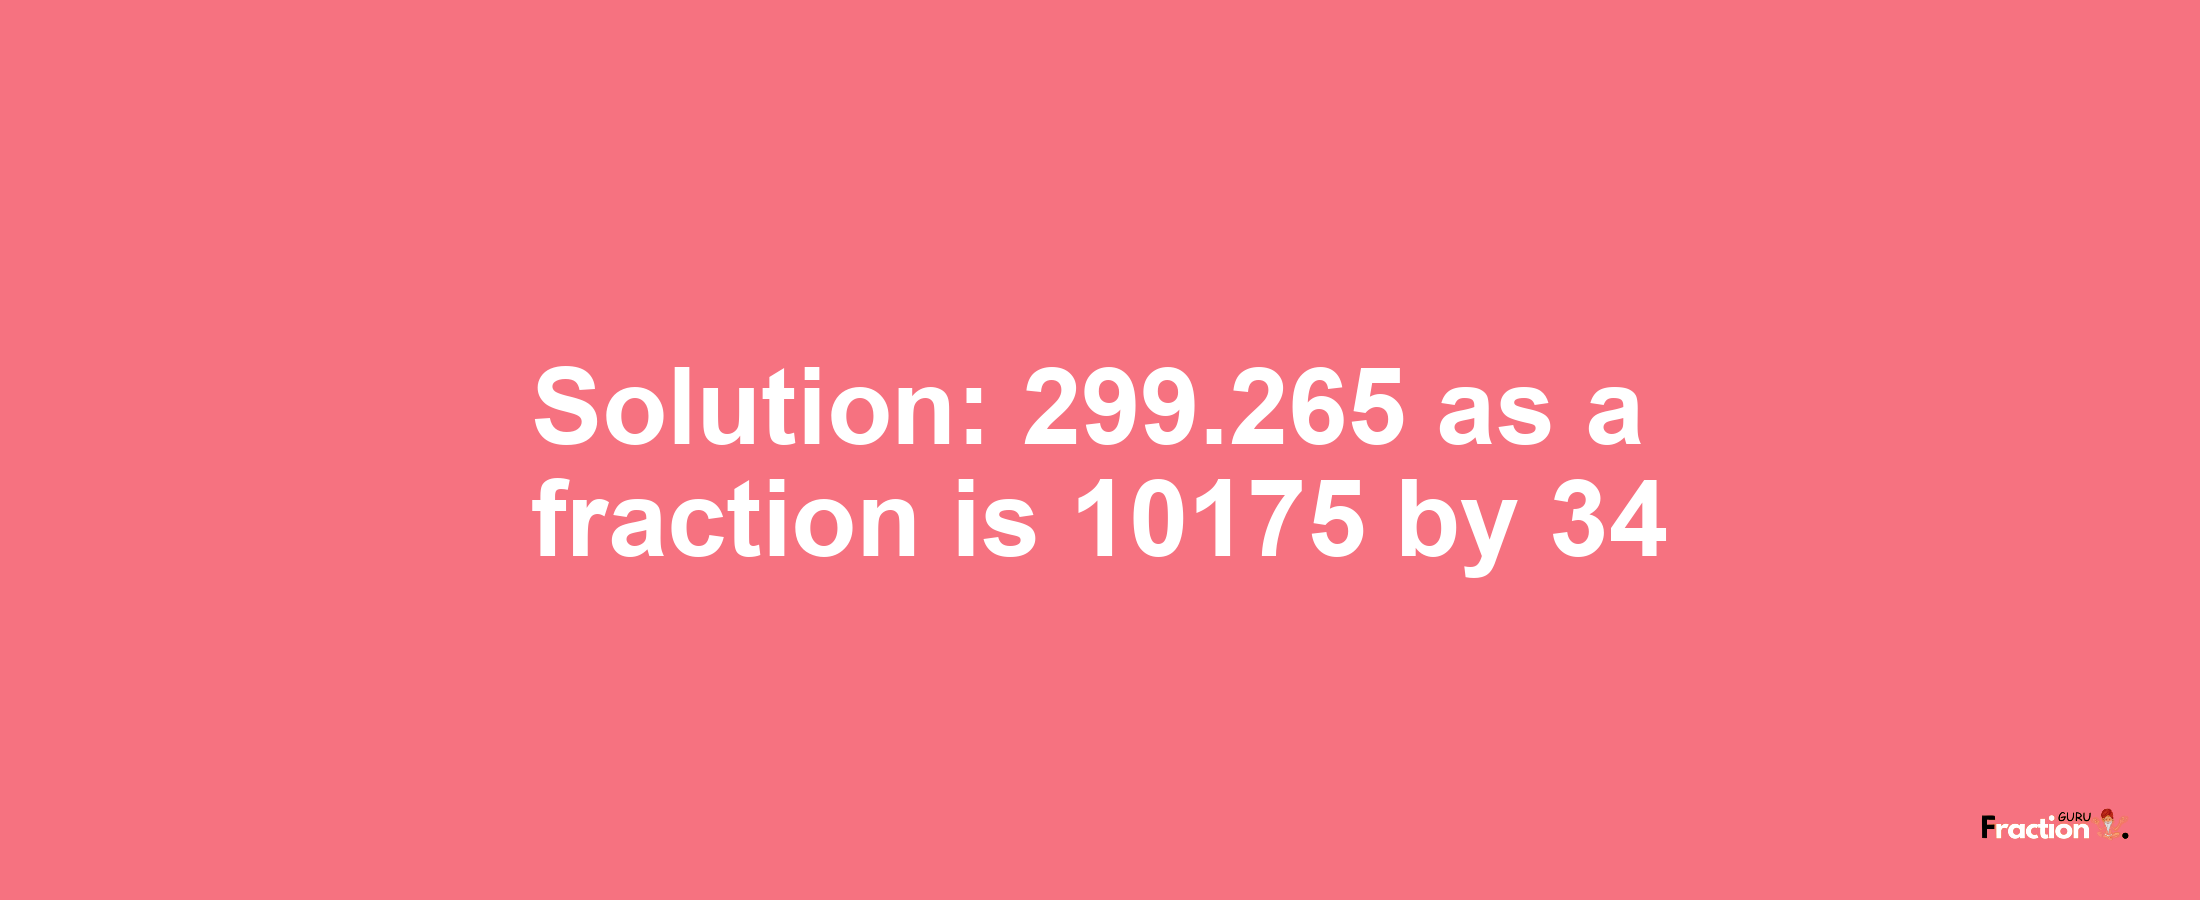 Solution:299.265 as a fraction is 10175/34